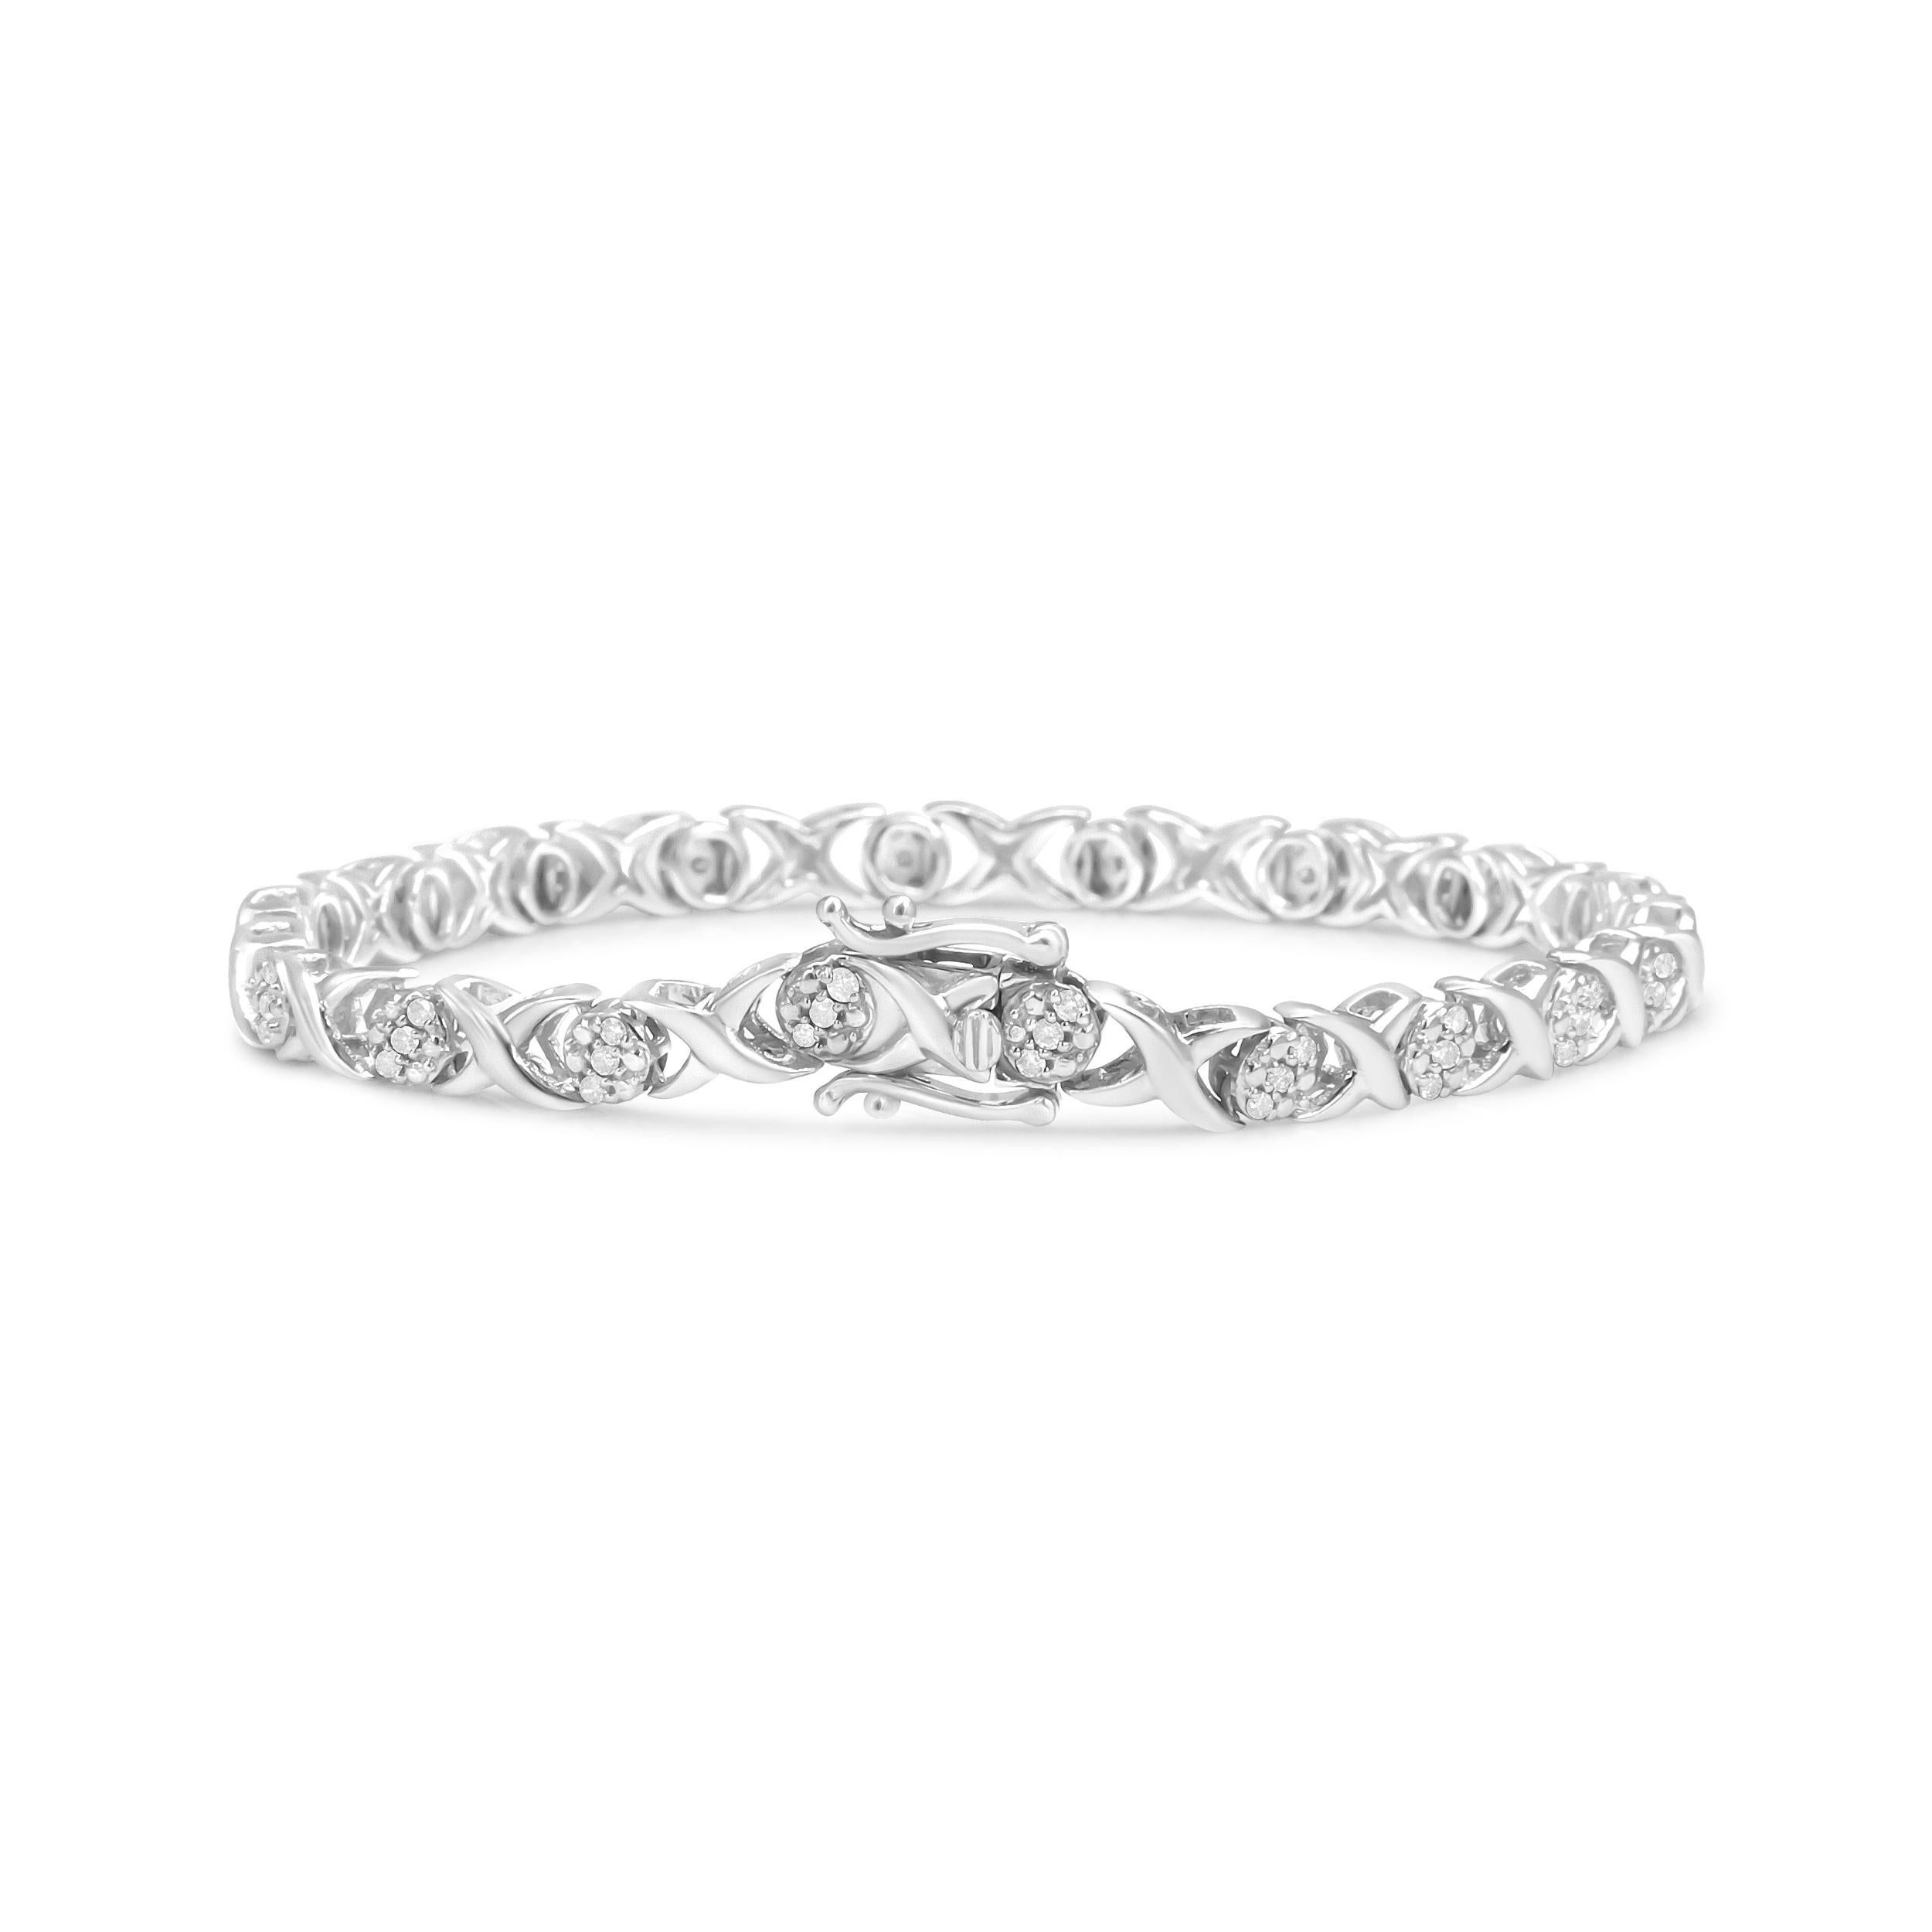 The enchanting style of this diamond link bracelet features unique X-links punctuated by clusters of round white diamonds set in a medallion shape. The diamonds are prong set and total 1/2 cttw with an approximate I-J Color and I1-I2 Clarity.